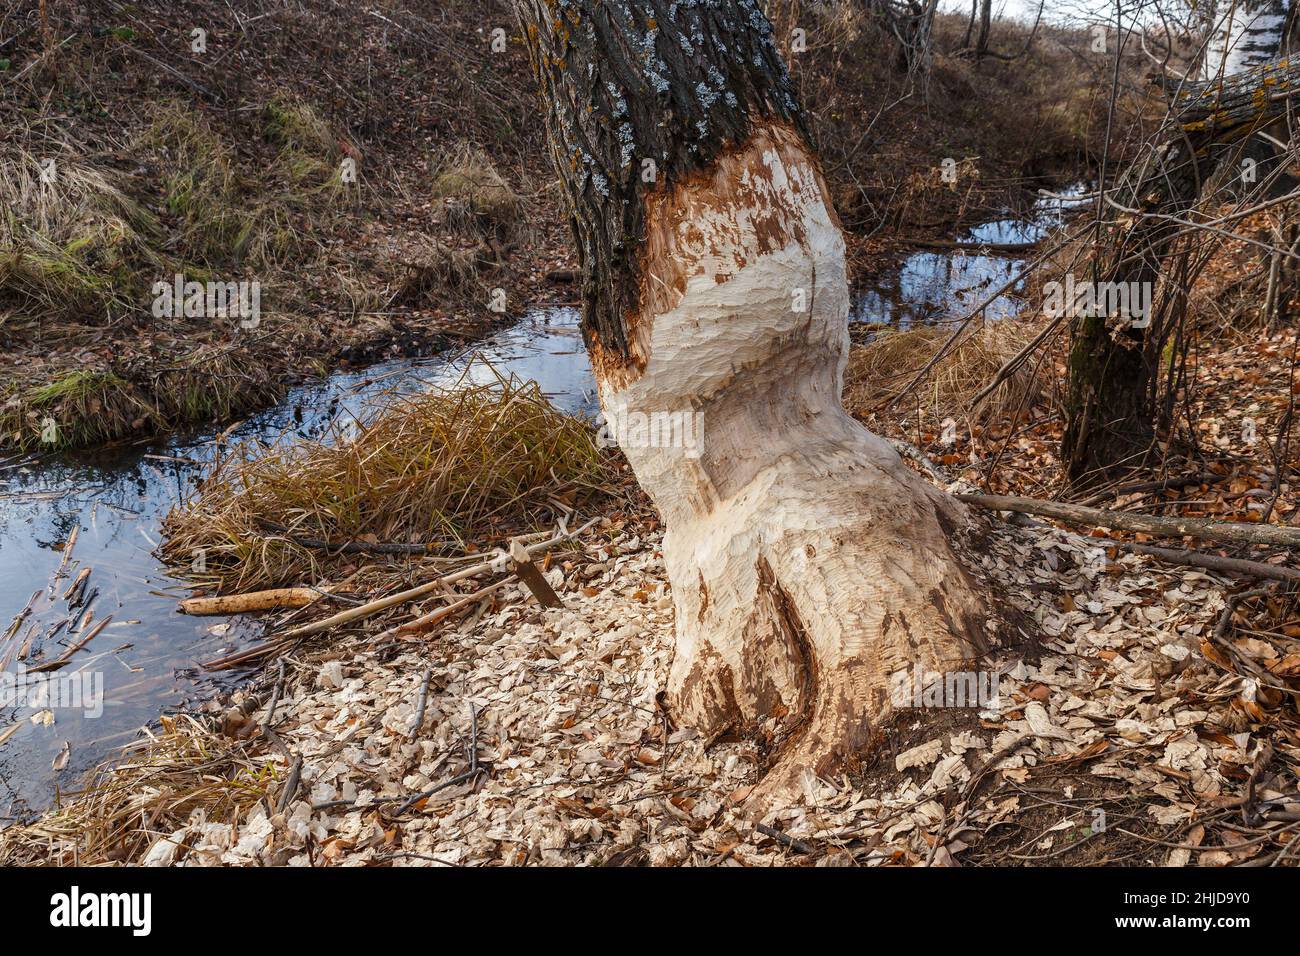 Beavers nibbled the trunk of a tree. Beaver teeth marks on trees. Sawdust is all around the tree. Stock Photo